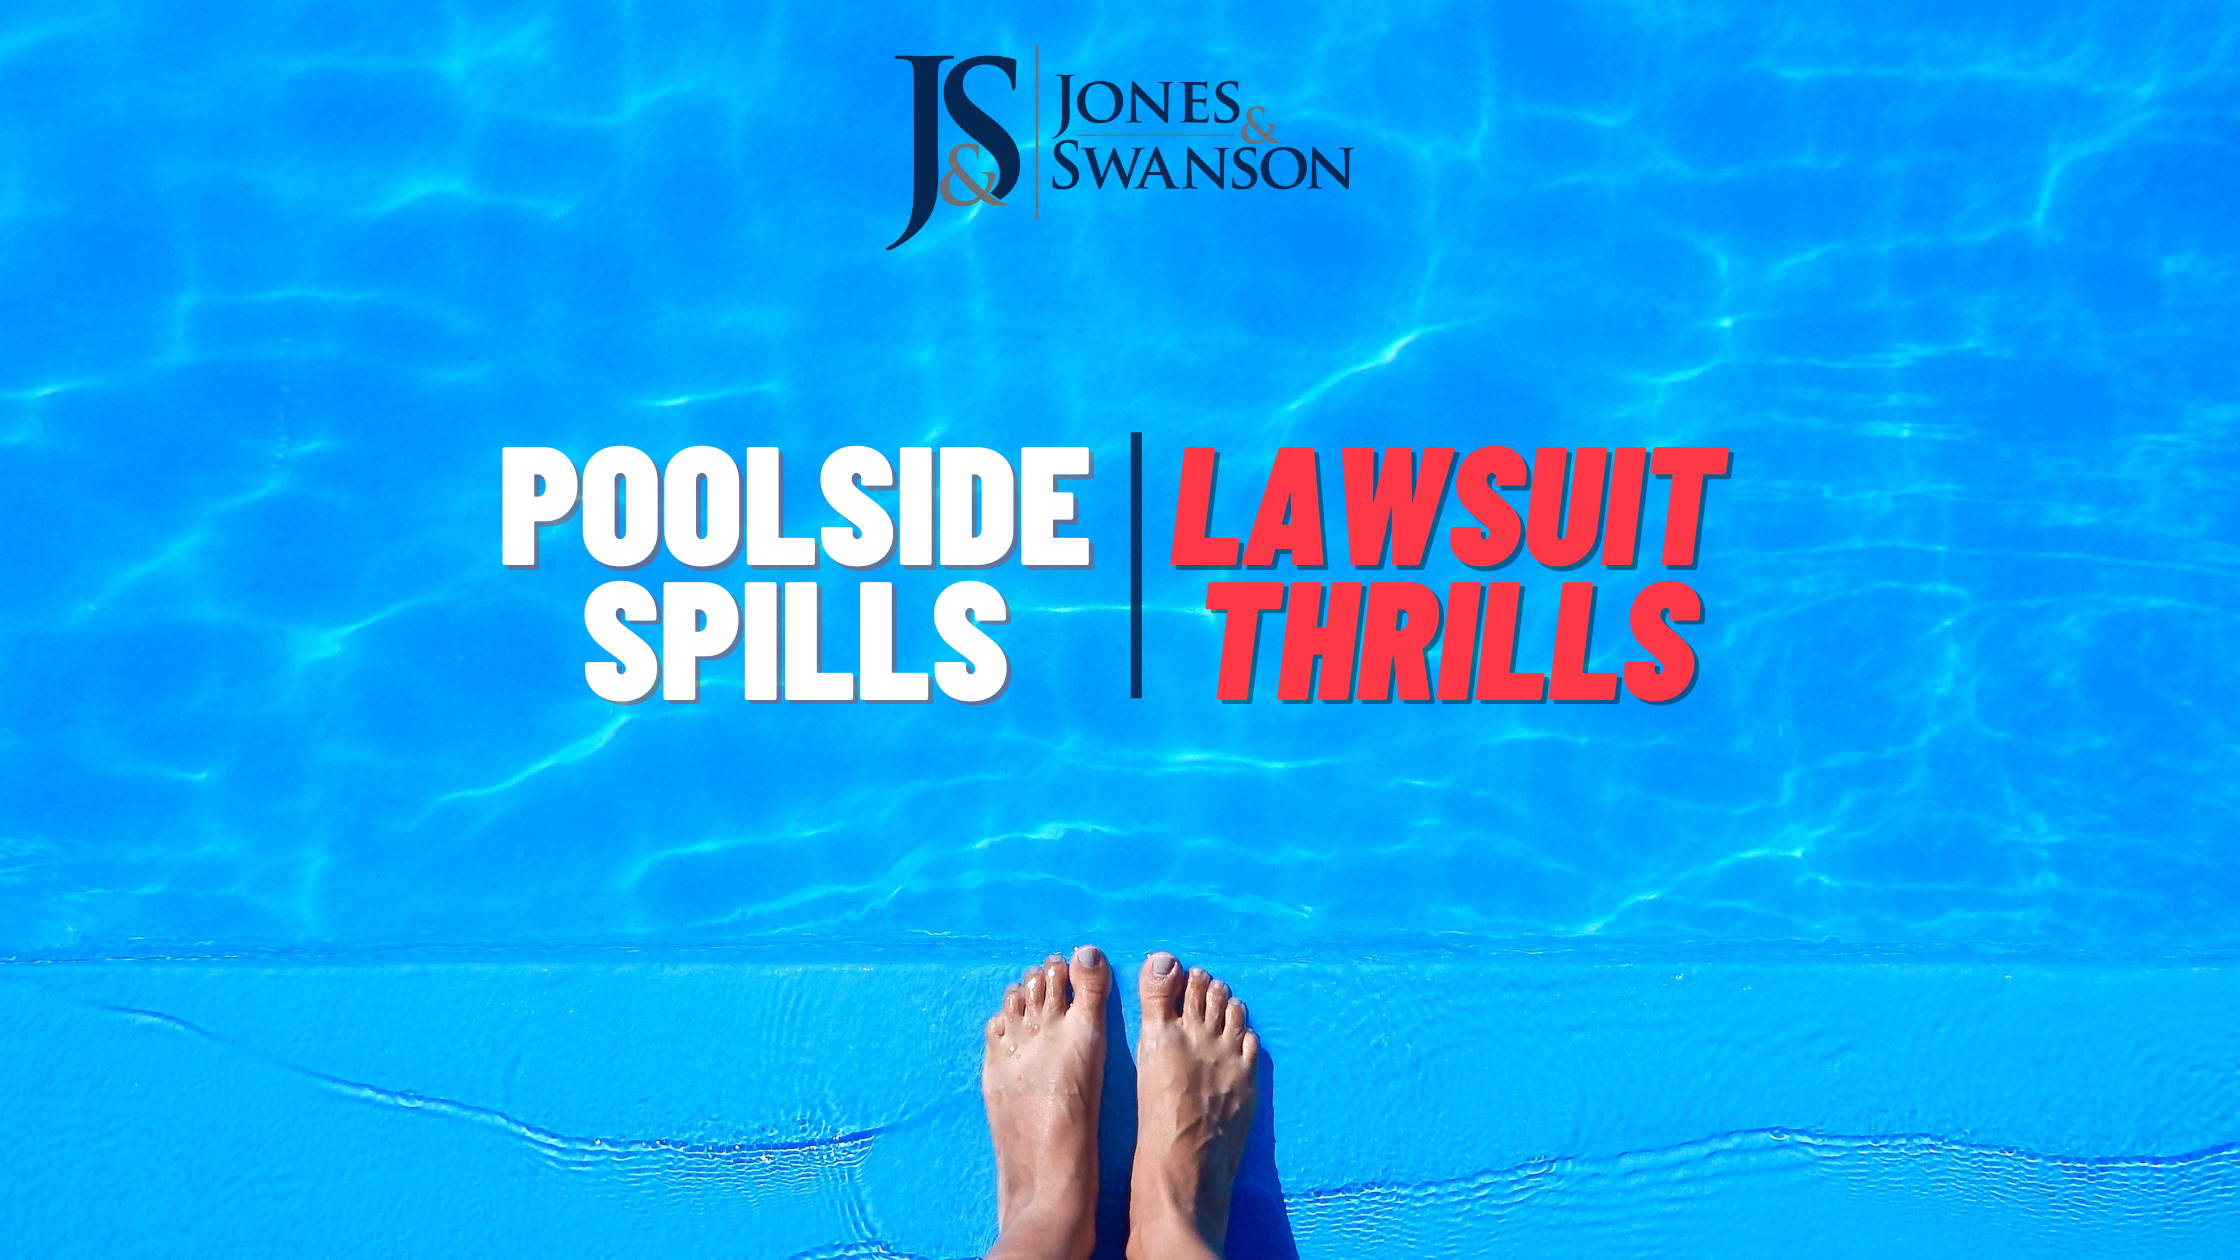 Pool Safety Tips: Poolside Spills, Lawsuit Thrills